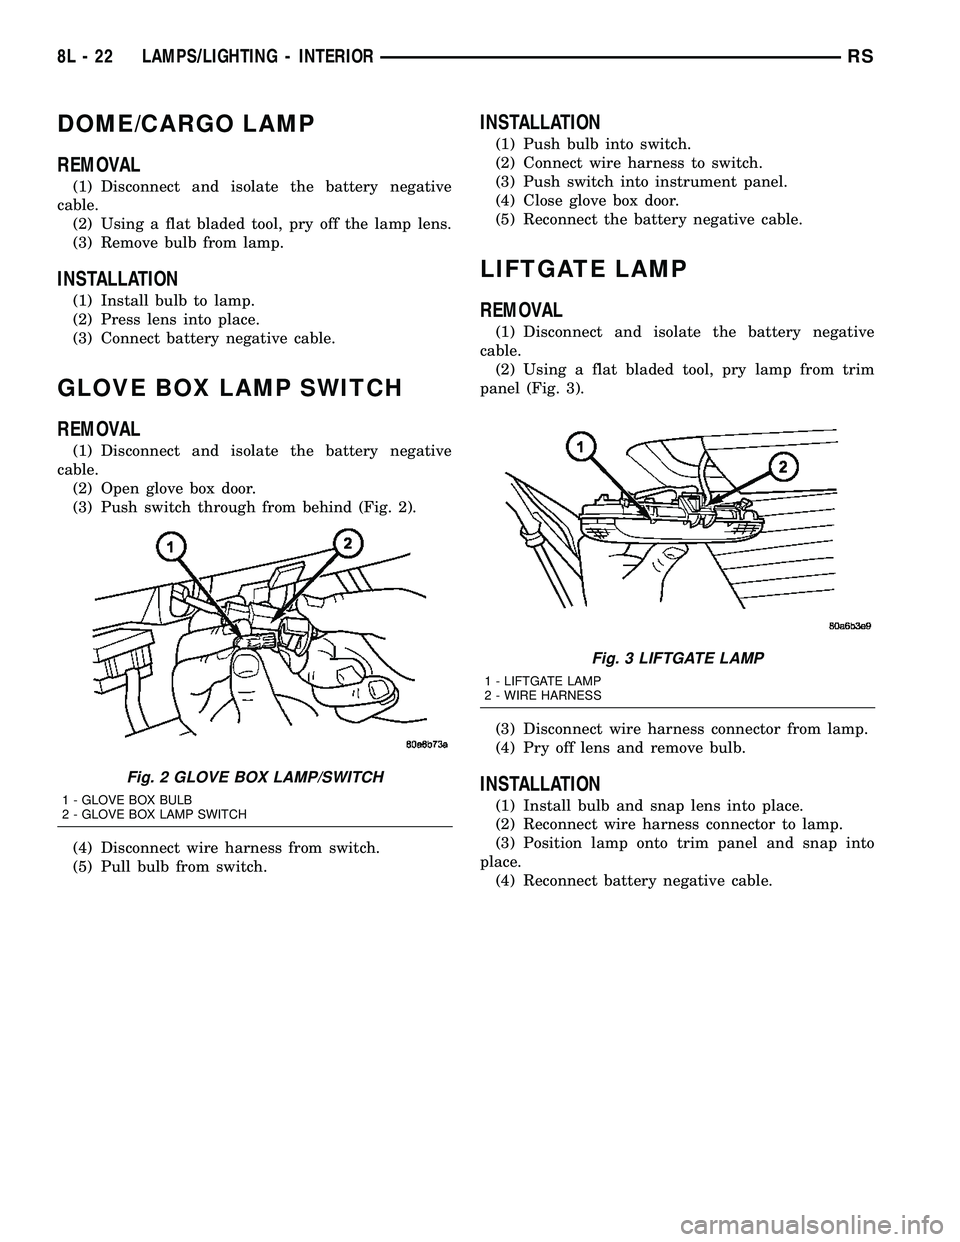 DODGE TOWN AND COUNTRY 2004  Service Manual DOME/CARGO LAMP
REMOVAL
(1) Disconnect and isolate the battery negative
cable.
(2) Using a flat bladed tool, pry off the lamp lens.
(3) Remove bulb from lamp.
INSTALLATION
(1) Install bulb to lamp.
(2